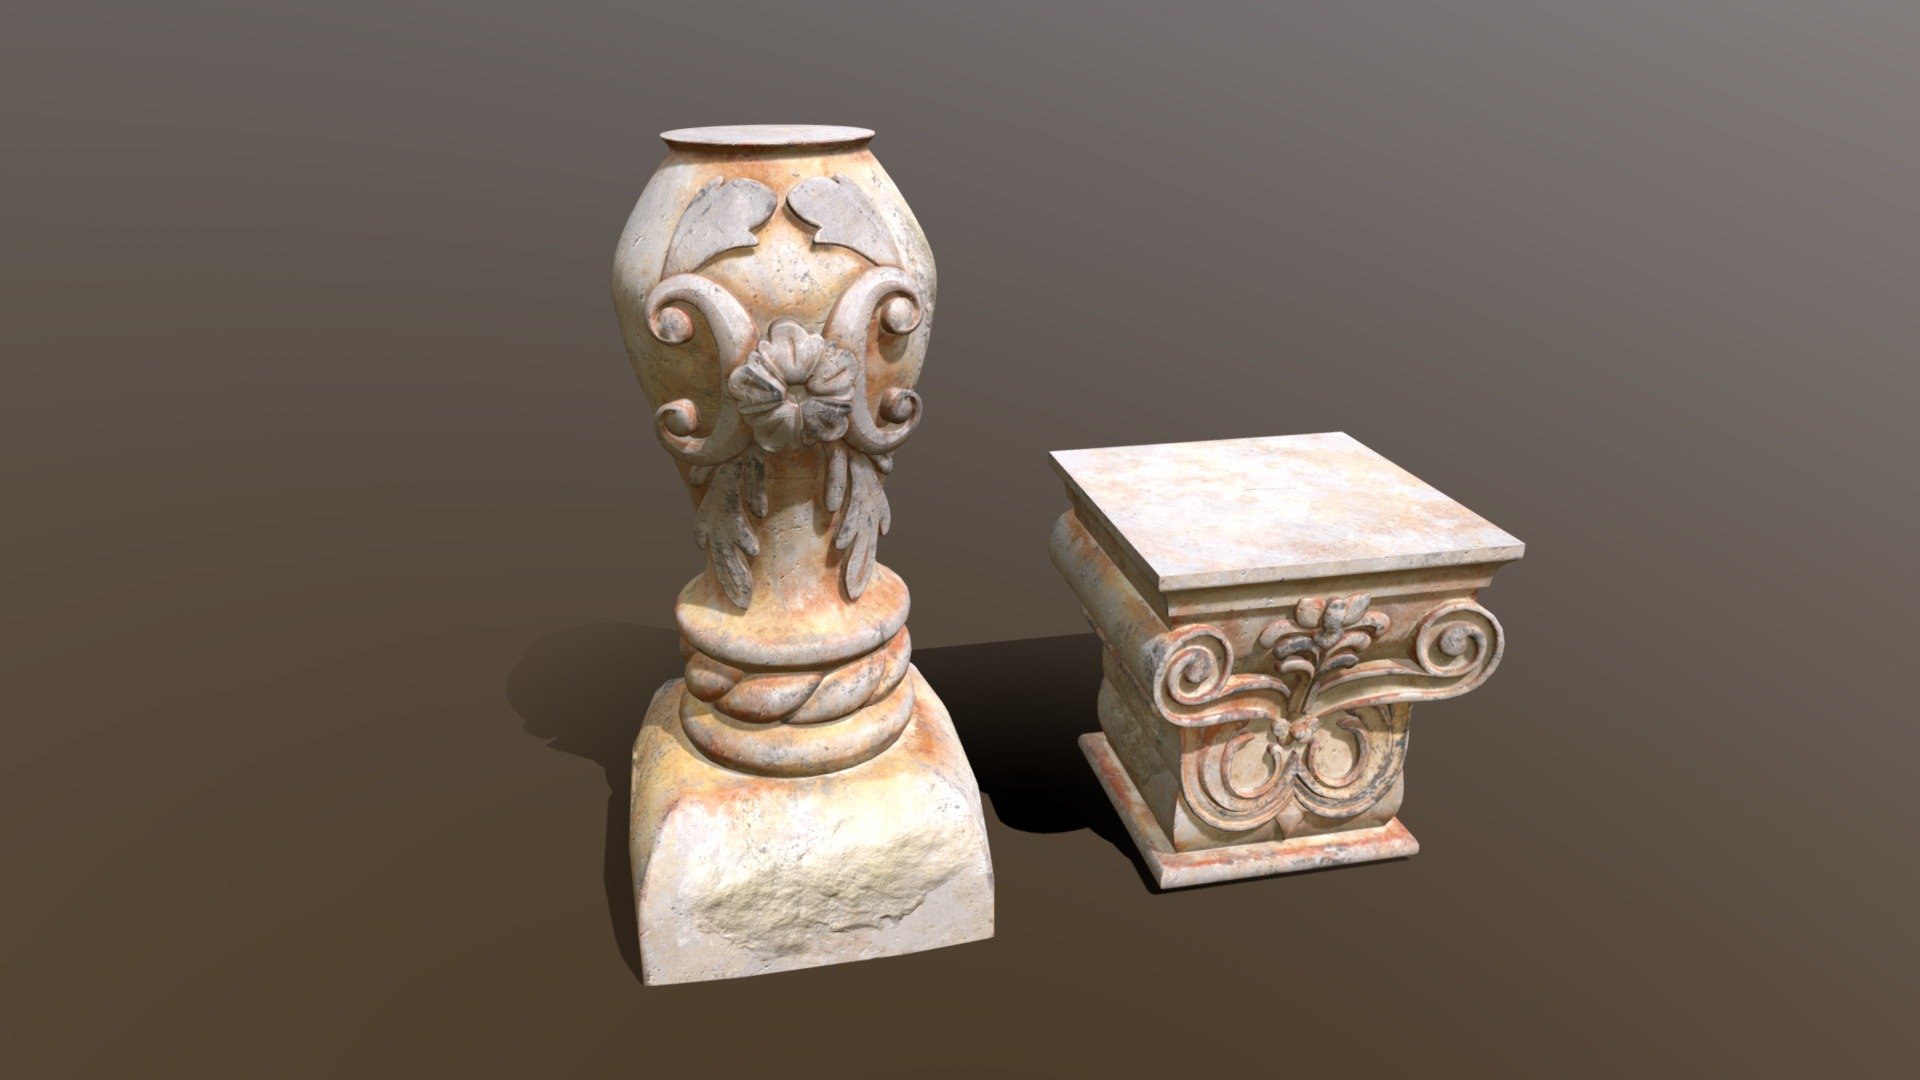 Marble Floral Garden Decoration 3D Model. This model contains the Marble Floral Garden Decoration itself 

All modeled in Maya, textured with Substance Painter.

The model was built to scale and is UV unwrapped properly. Contains a 4K UDIM Texture set. 2 Islands. Udim-1 and Udim-2 

⦁   46593 tris. 

⦁   Contains: .FBX .OBJ and .DAE

⦁   Model has clean topology. No Ngons.

⦁   Built to scale

⦁   Unwrapped UV Map

⦁   4K Texture set

⦁   High quality details

⦁   Based on real life references

⦁   Renders done in Marmoset Toolbag

Polycount: 

Verts 25215

Edges 48503 

Faces 23365

Tris 46593 

If you have any questions please feel free to ask me 3d model